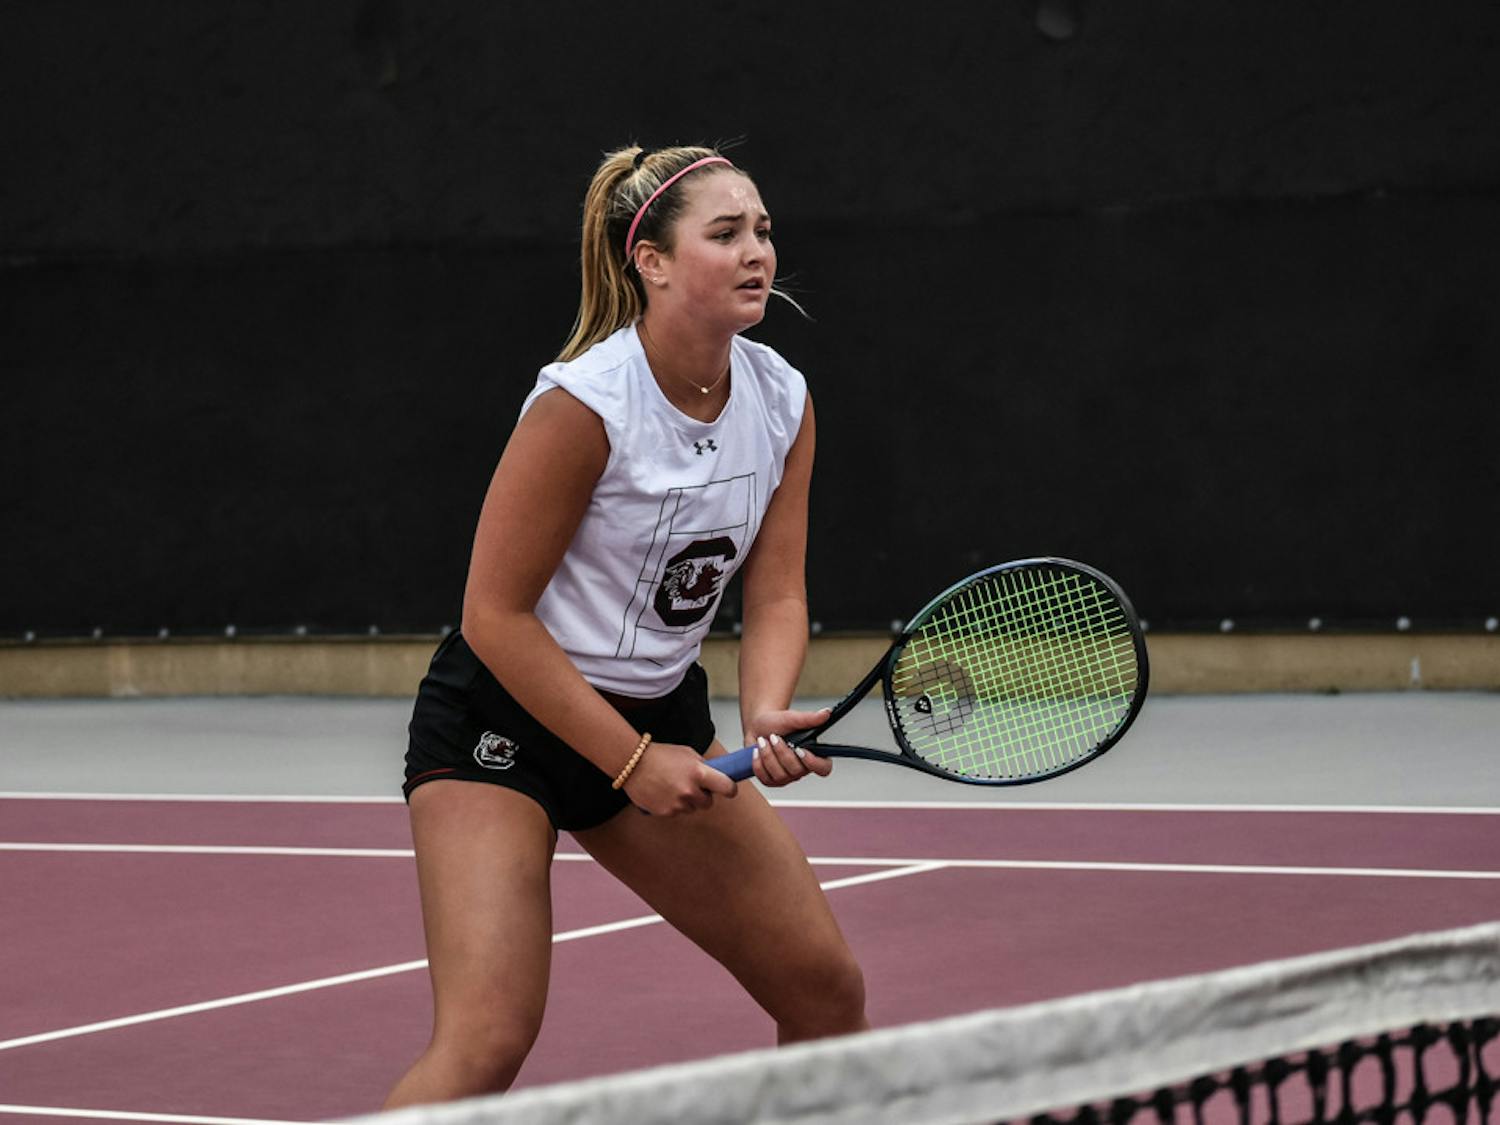 Freshman Alice Otis watches the ball on Kentucky's side of the court during the match on March 17, 2023. The Gamecocks won the match 4-3 and sit at 7-6 for the season.